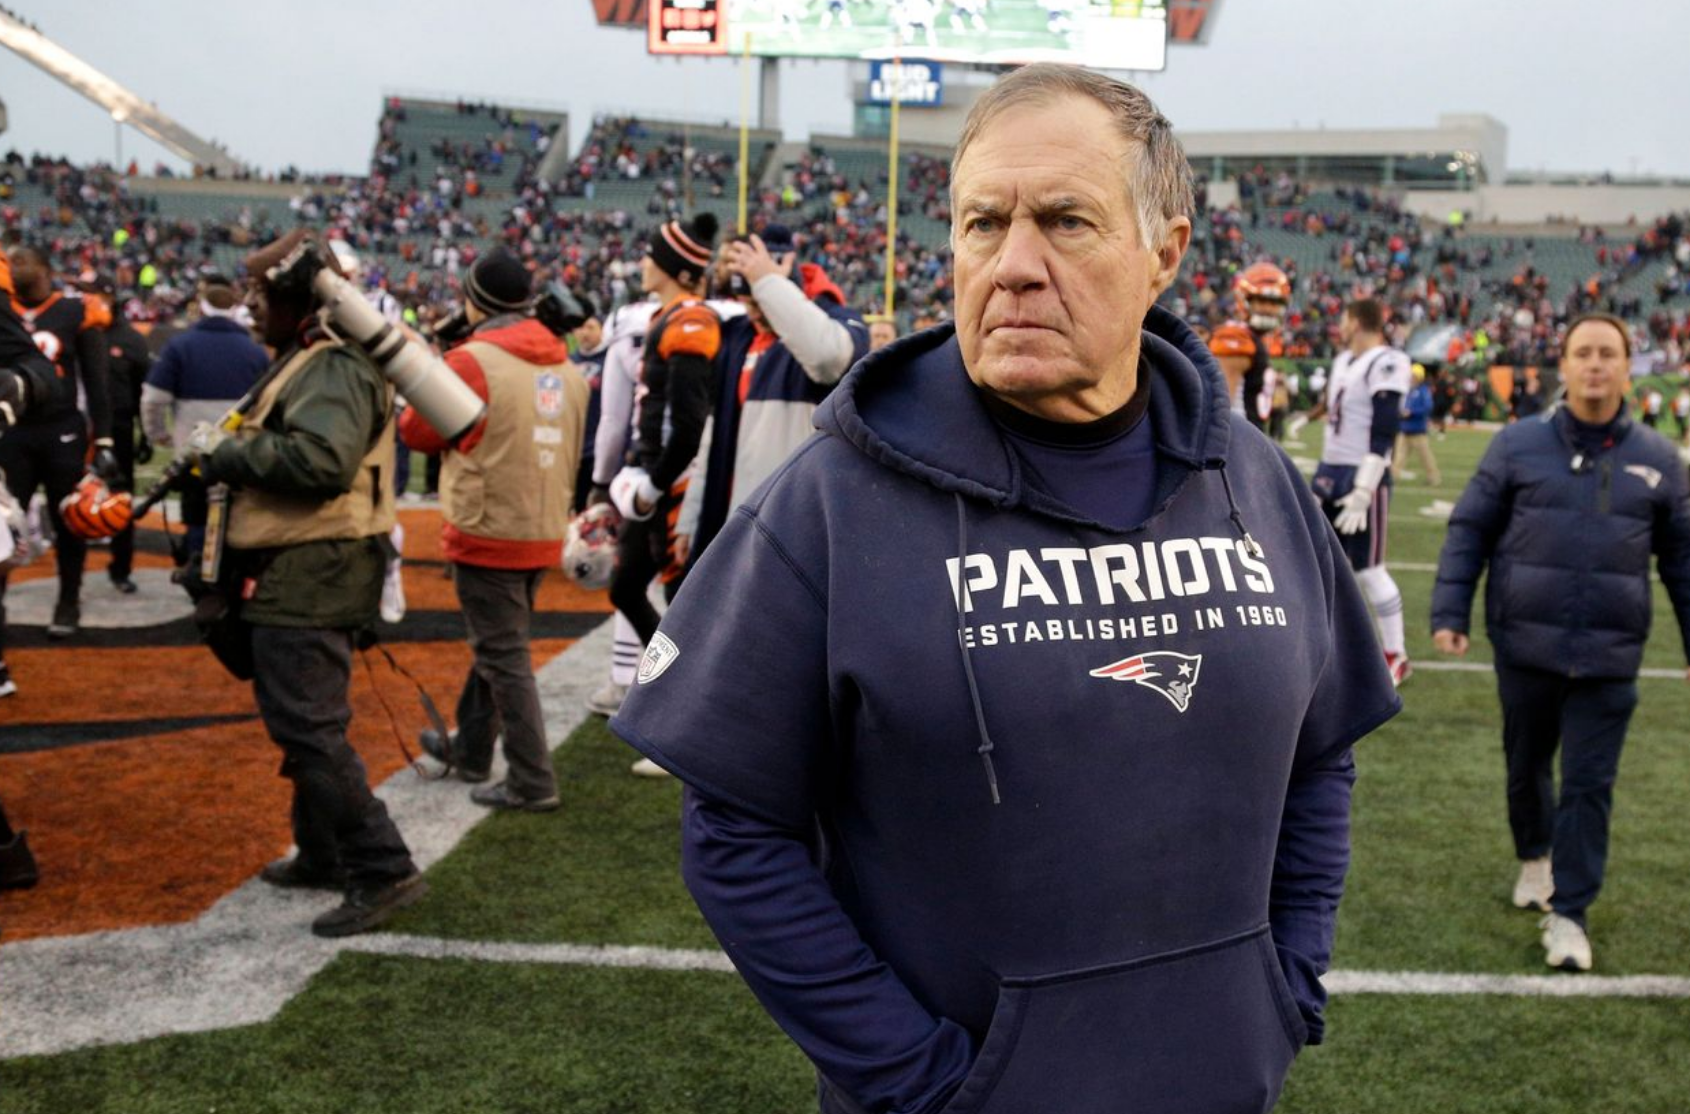 Spygate 2.0? Why This Perplexing Patriots Cheating Scandal Is So Tense